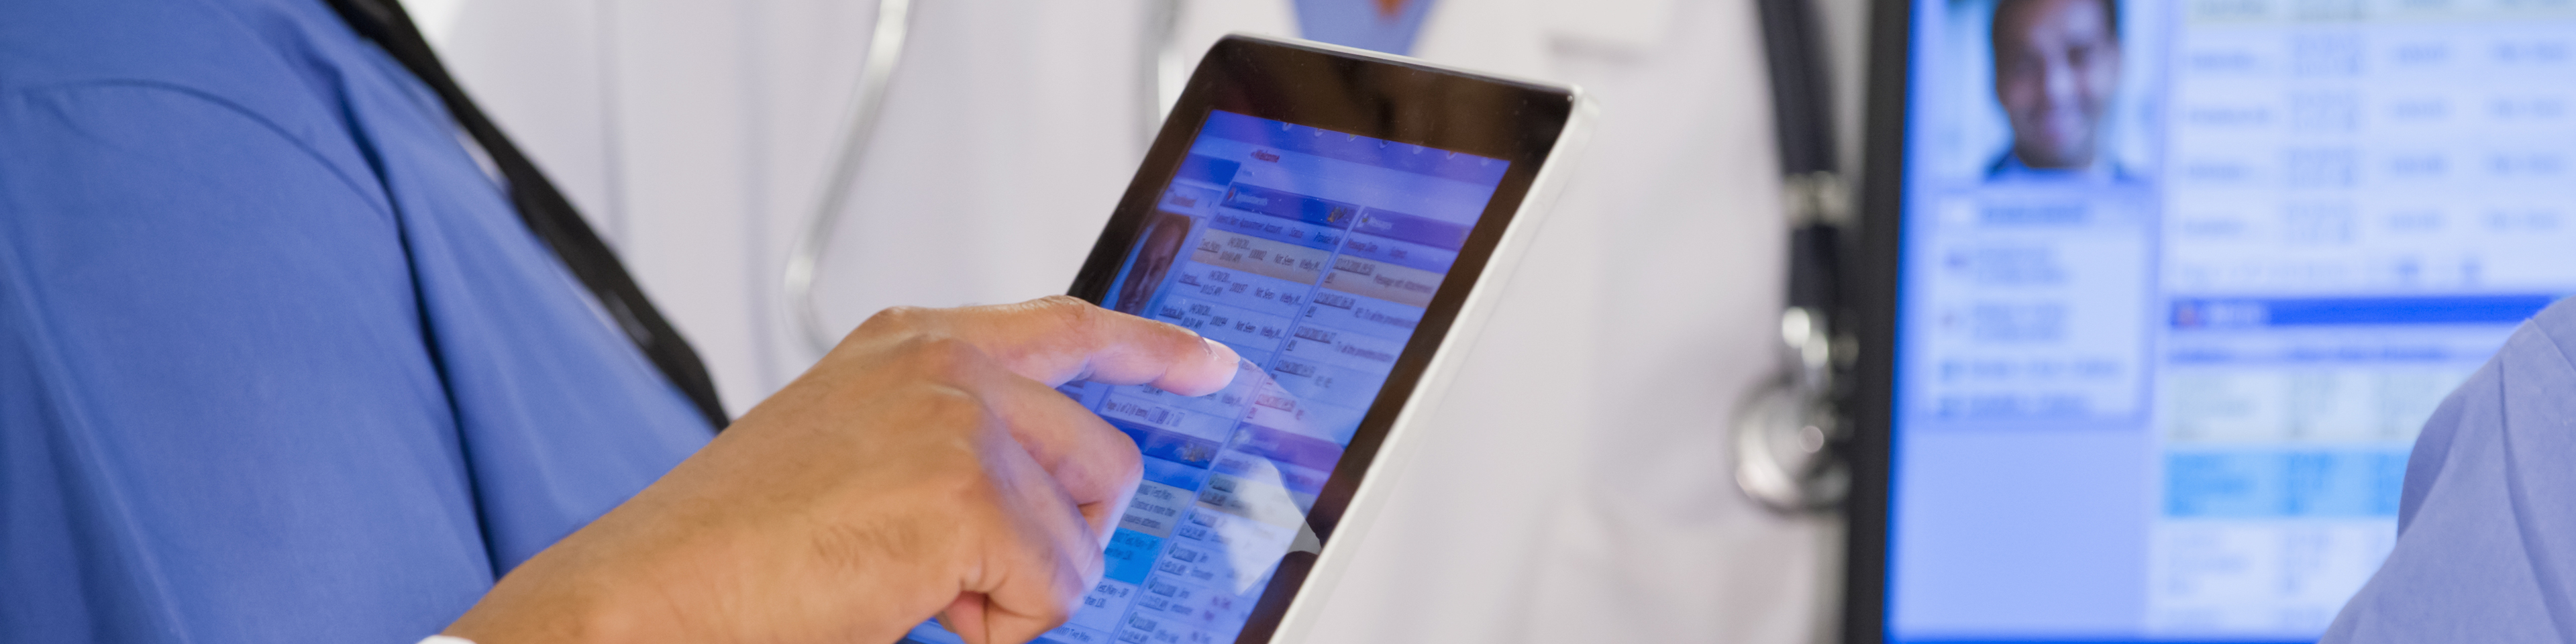 Medication decision support systems help build a resilient digital healthcare foundation